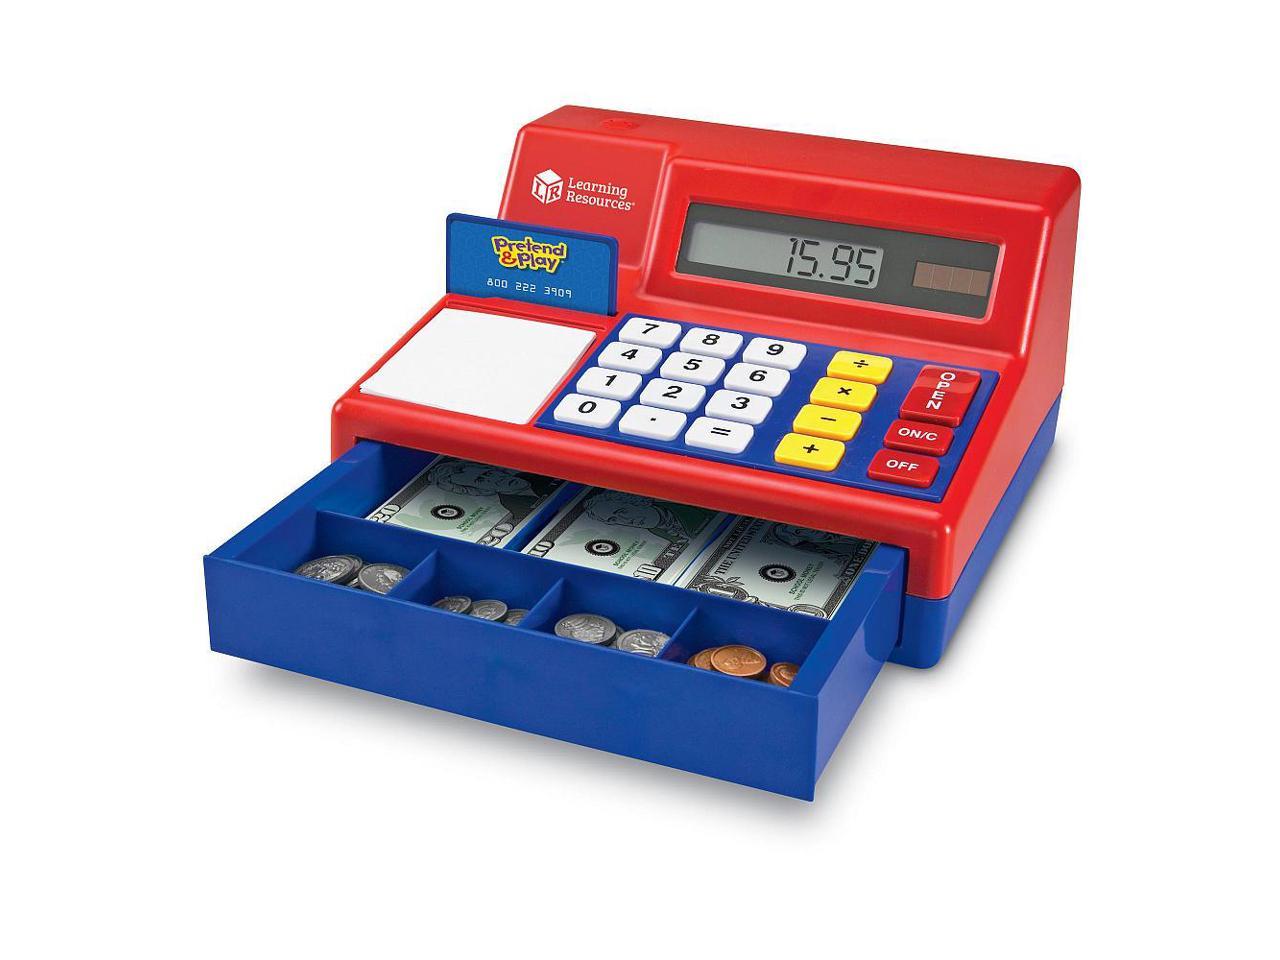 Learning Resources Pretend & Play Calculator Cash Register, Educational Learning Preschool Play Cash Register Toy for Girls and Boys, Sustainable Toys Ages 3 4 5+ - image 1 of 9